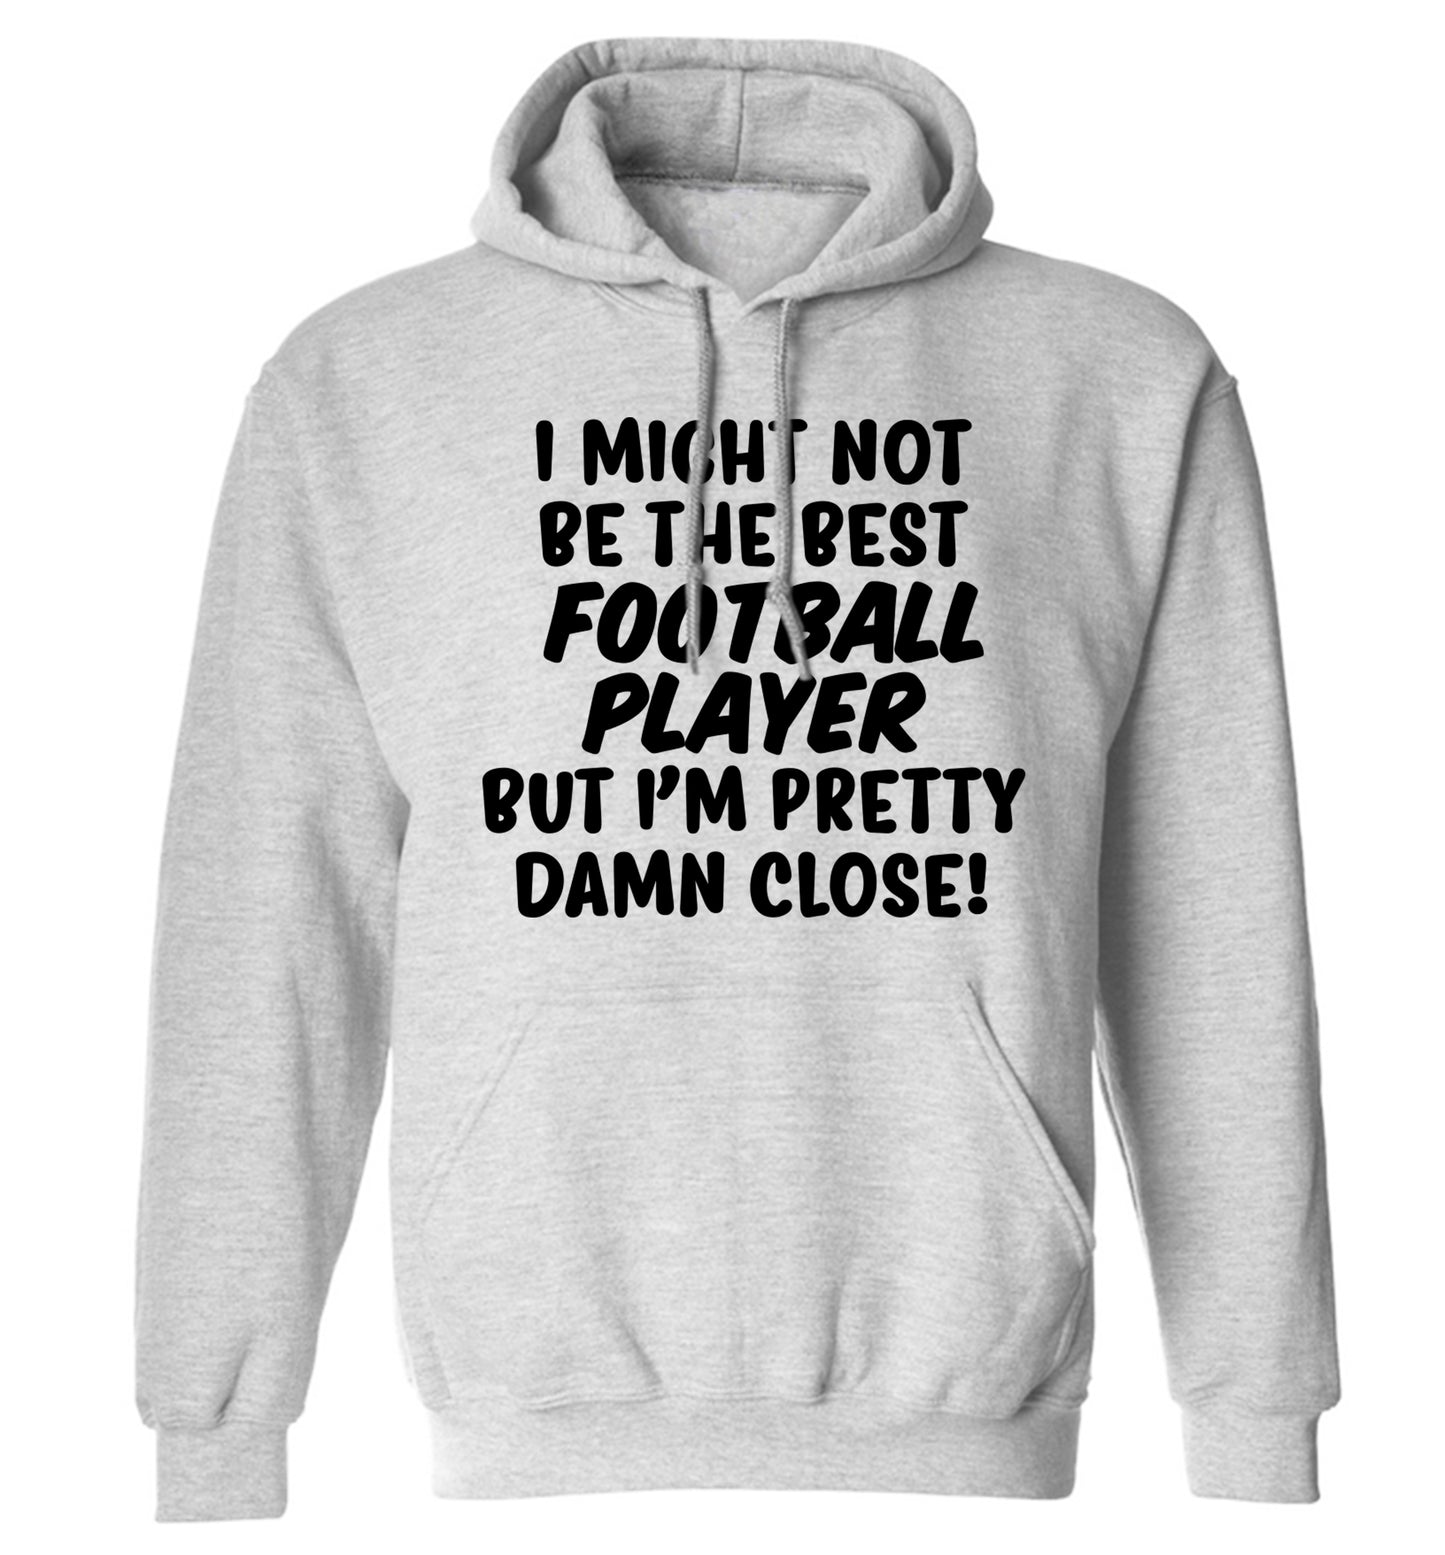 I might not be the best football player but I'm pretty close! adults unisexgrey hoodie 2XL